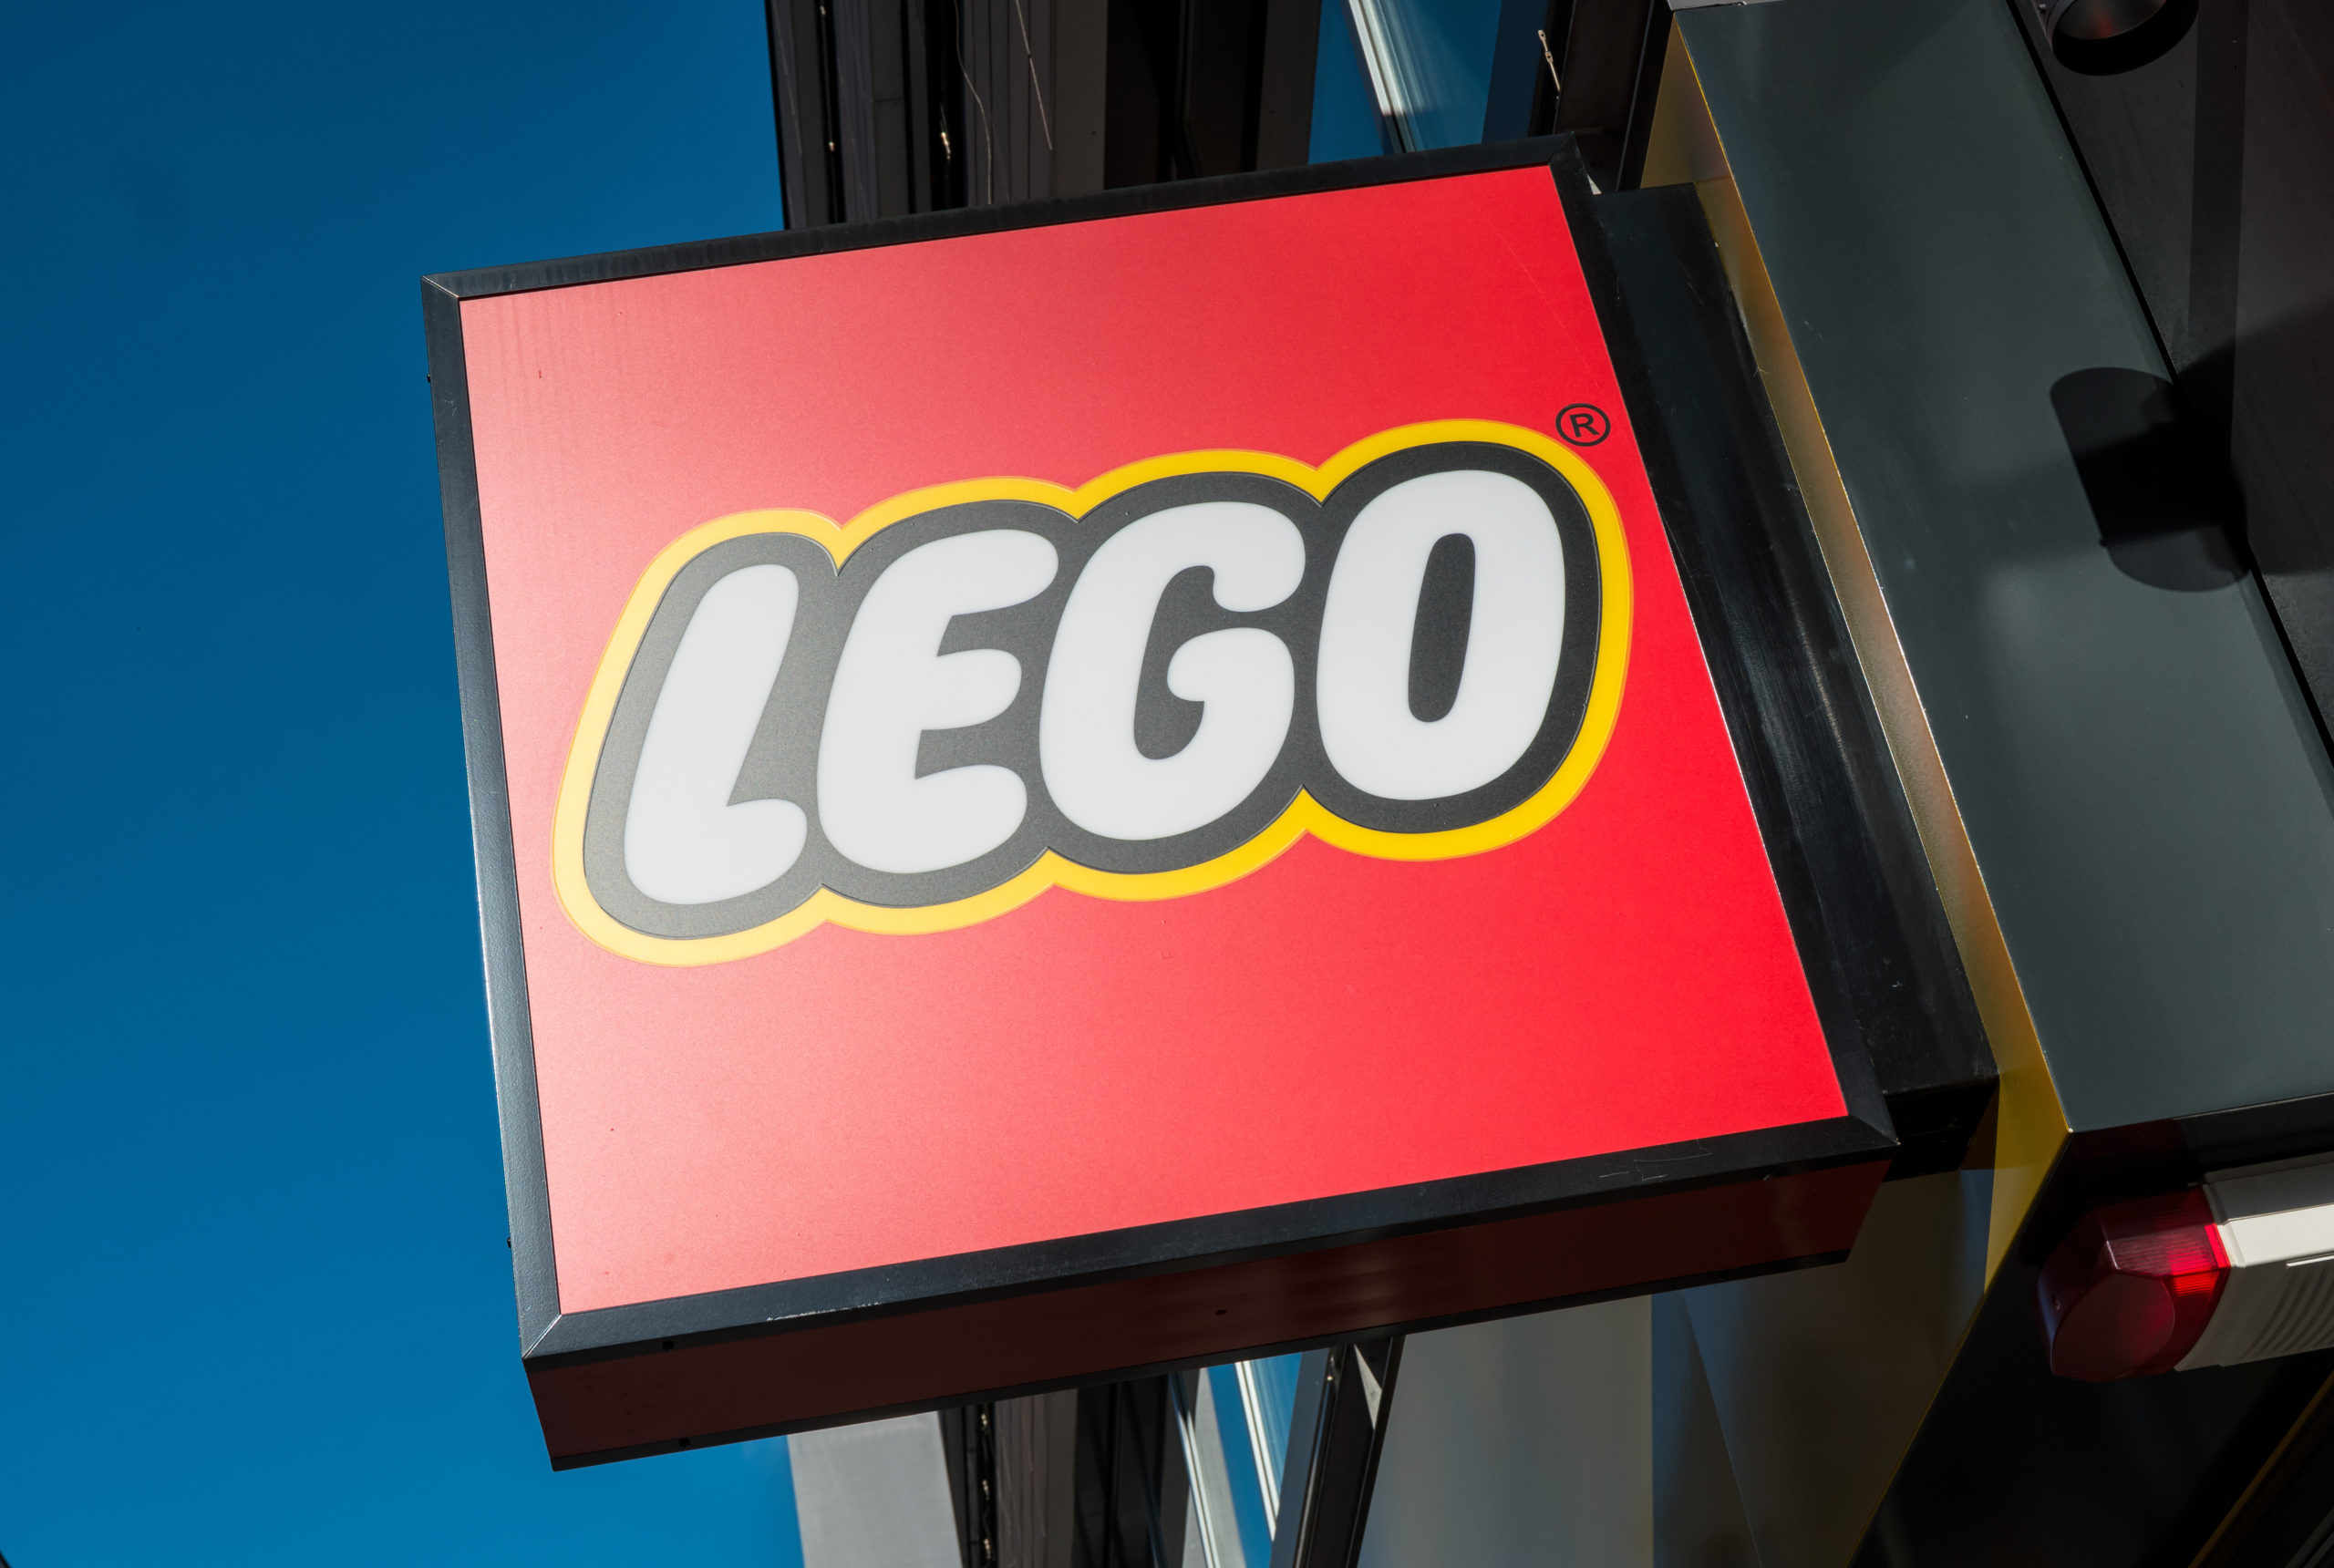 Succeed in your marketing mix, and Lego's example!